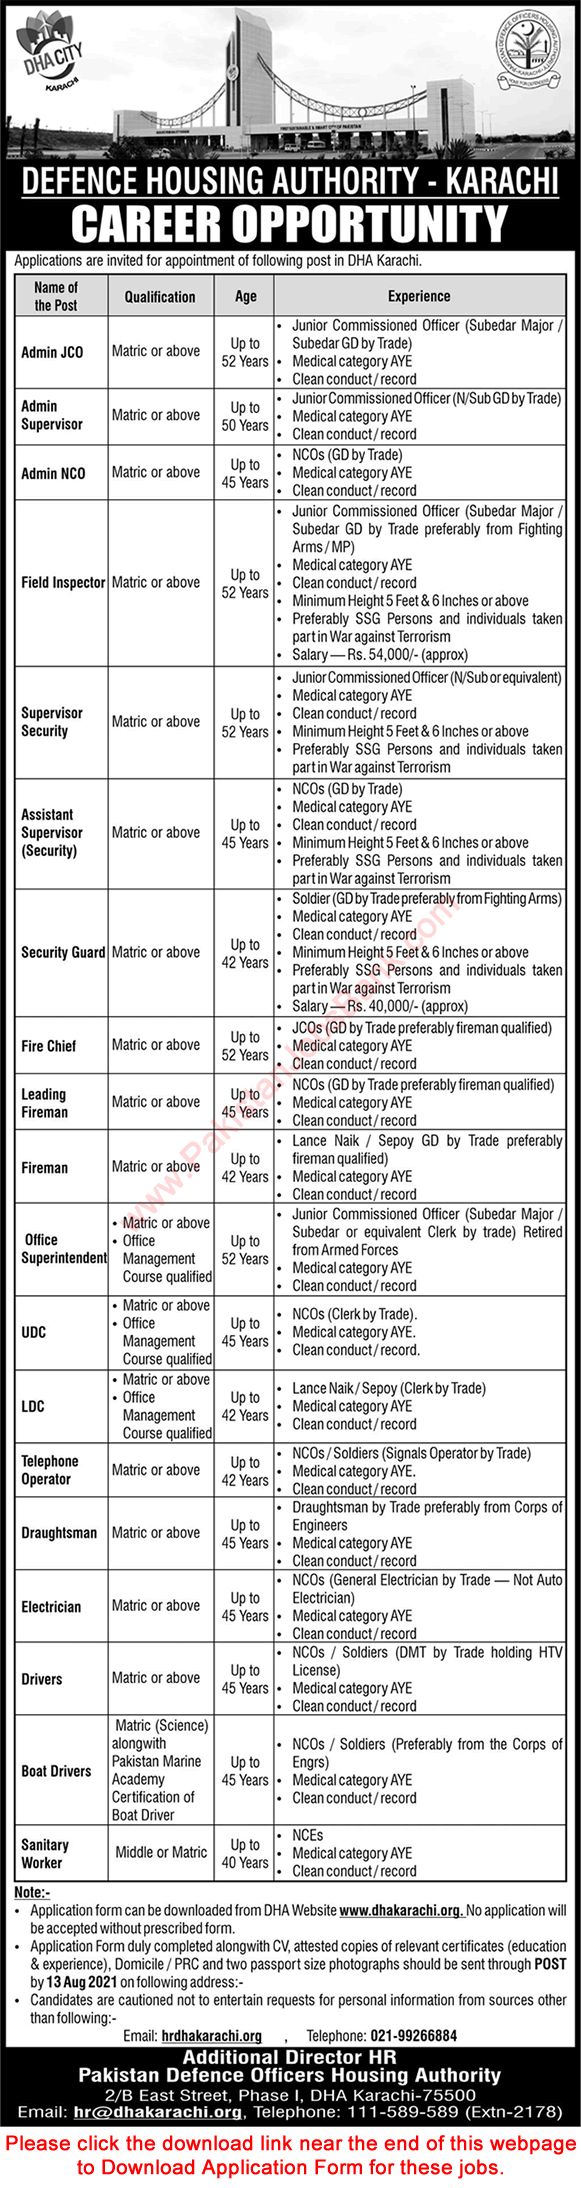 DHA Karachi Jobs August 2021 Application Form Defence Housing Authority Latest